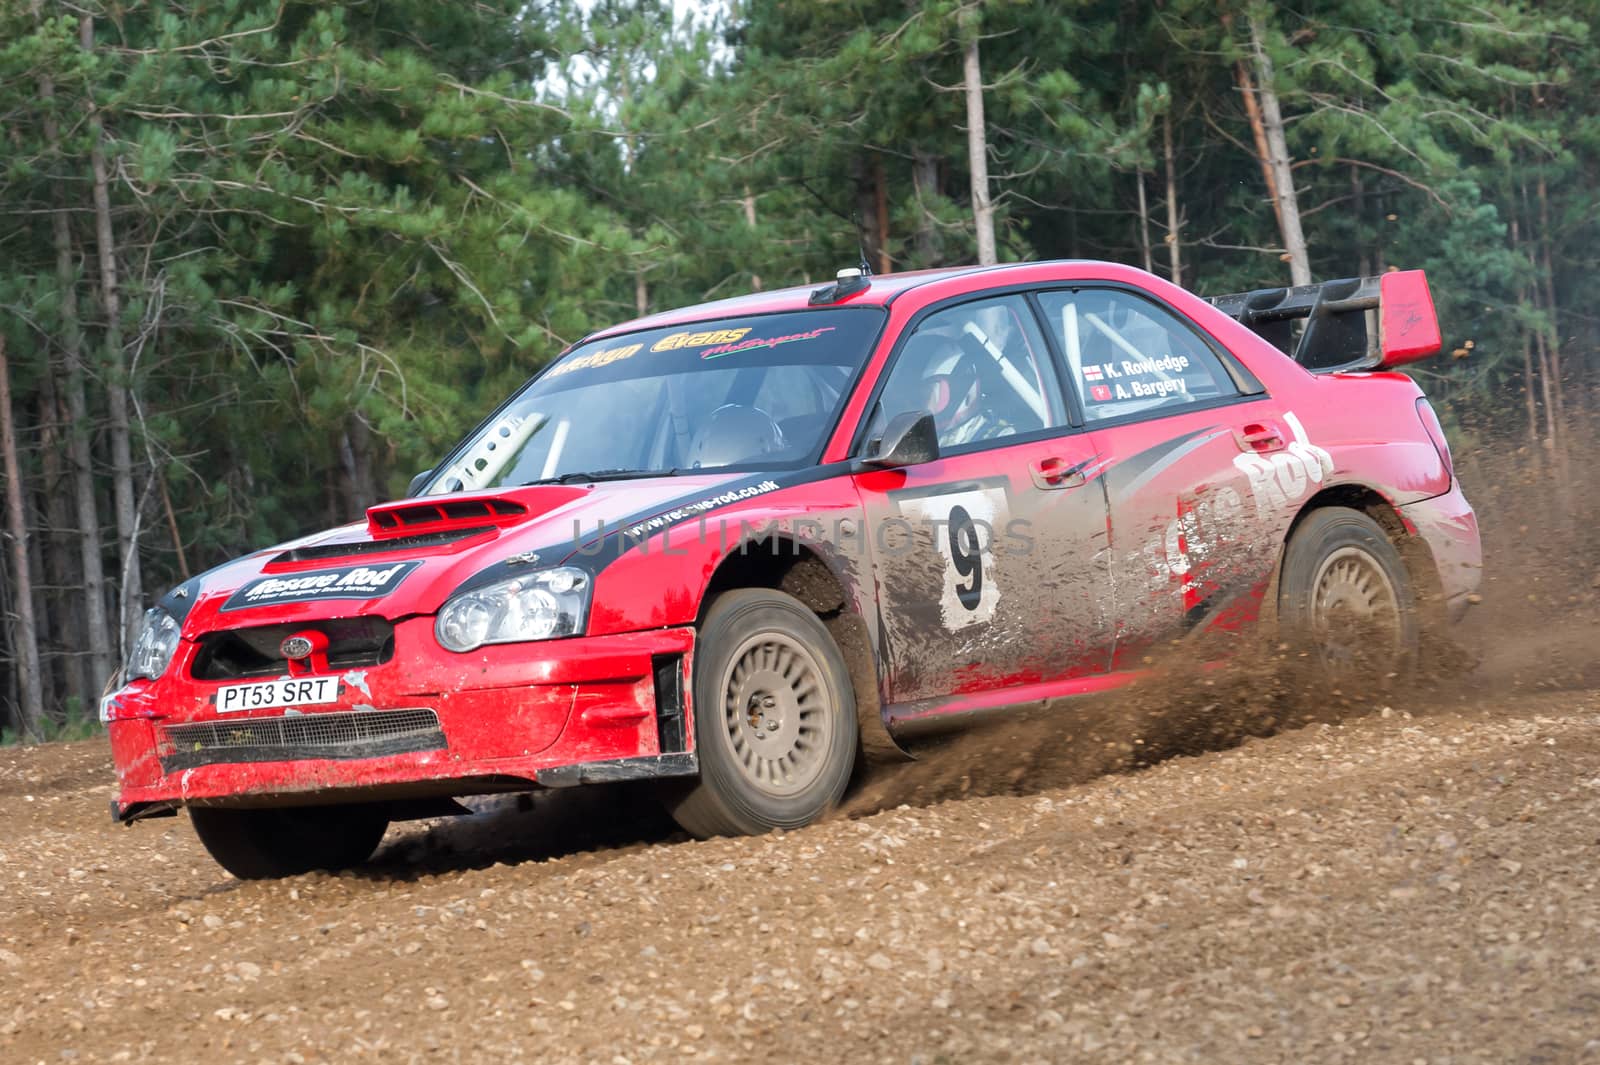 Bramshill Forest, UK - November 3, 2012: Kevin Rowledge sideways in a WRC spec Subaru Impreza on the Warren stage of the MSA Tempest Rally in Bramshill Forest, UK